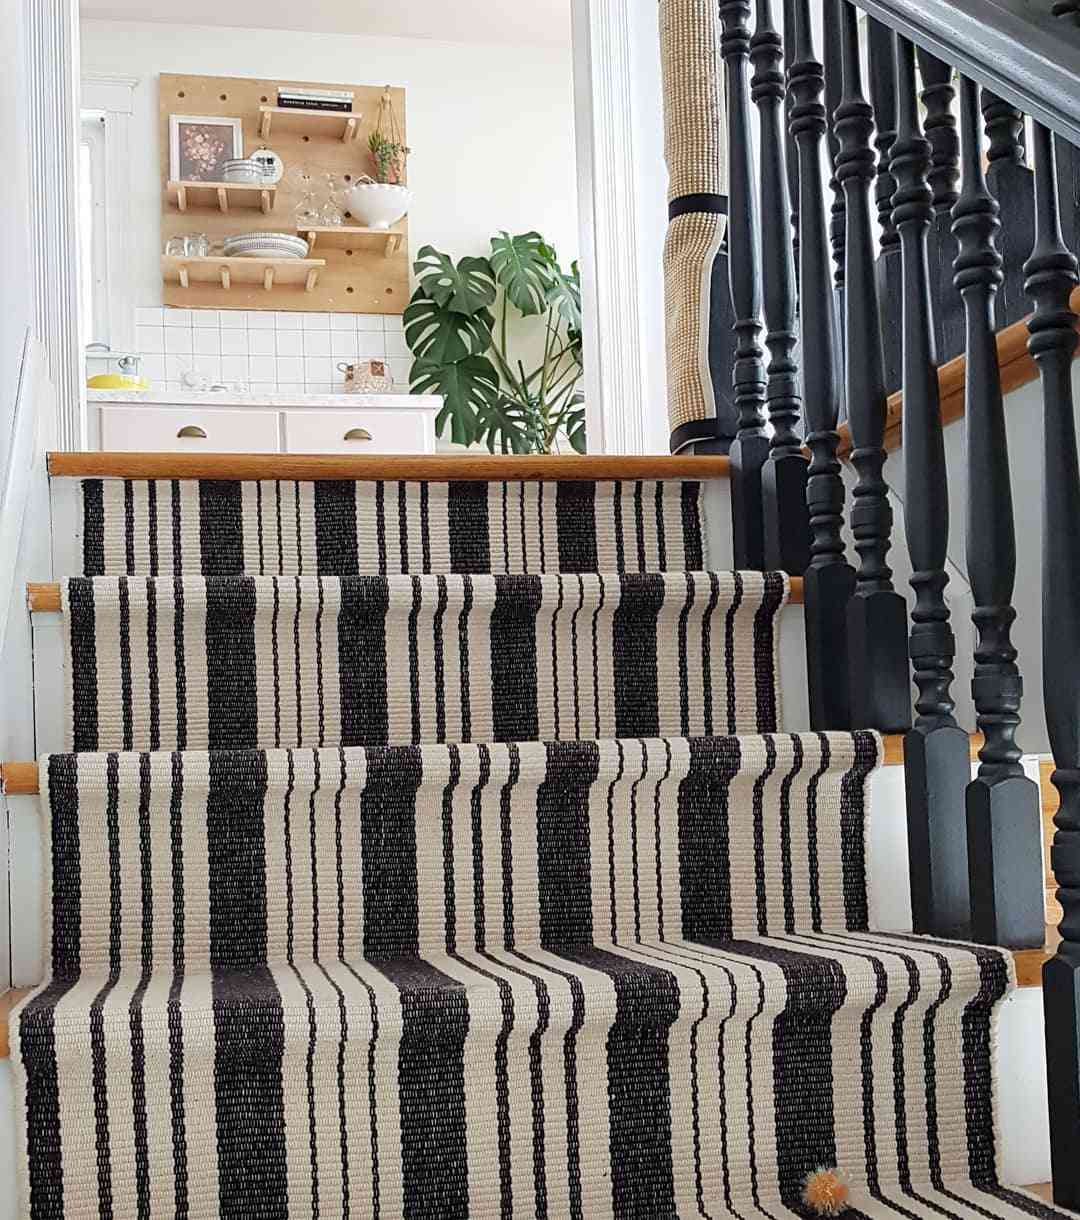 classic black and white striped runner